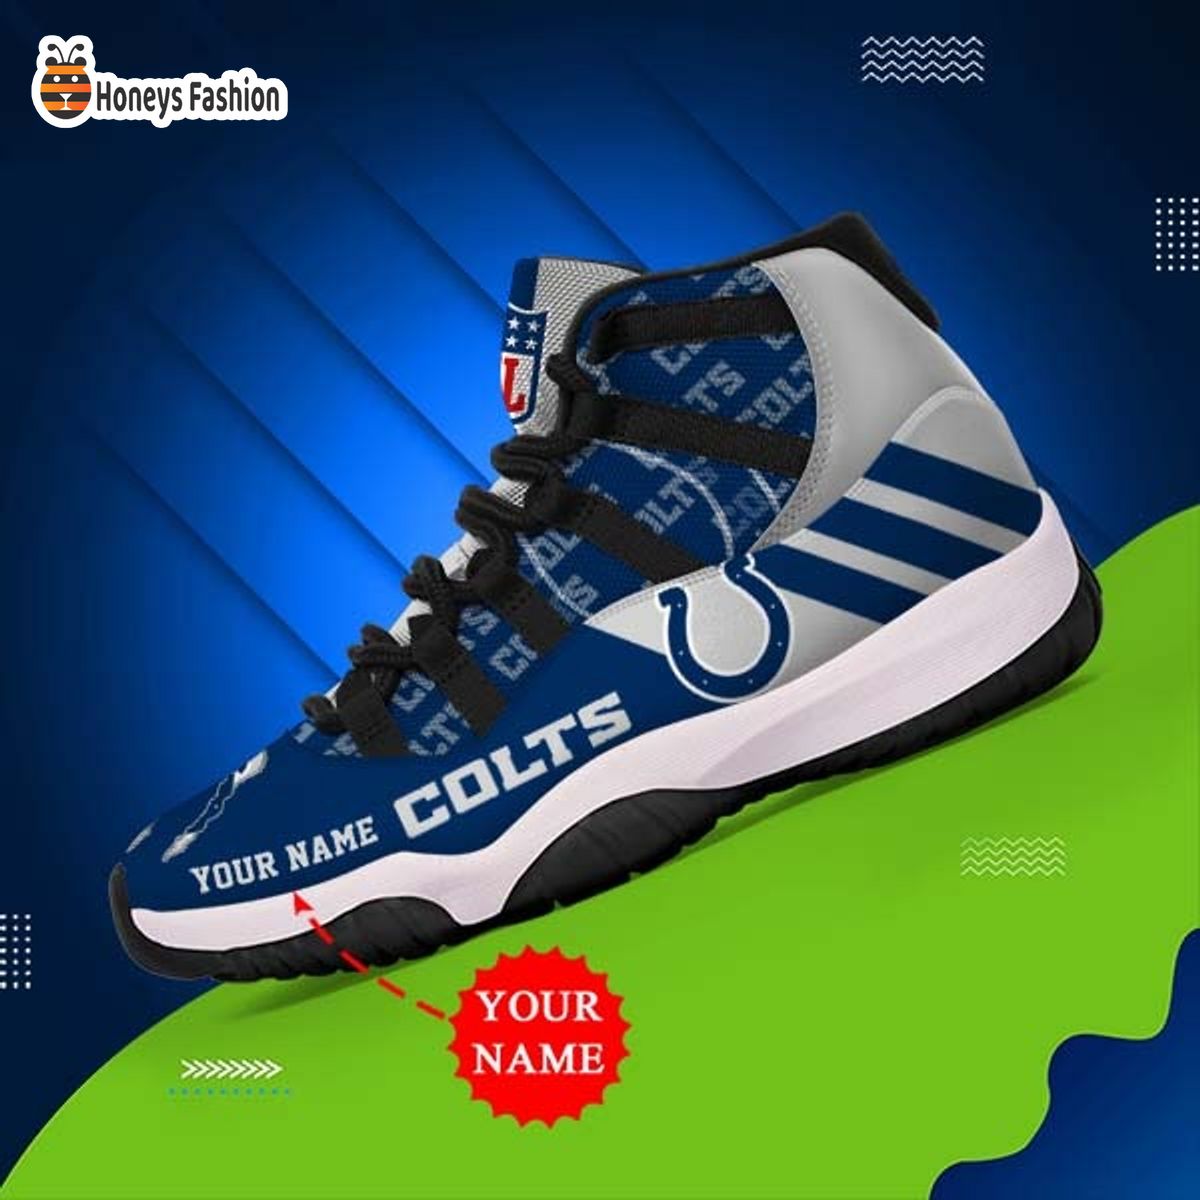 Indianapolis Colts NFL Adidas Personalized Air Jordan 11 Shoes